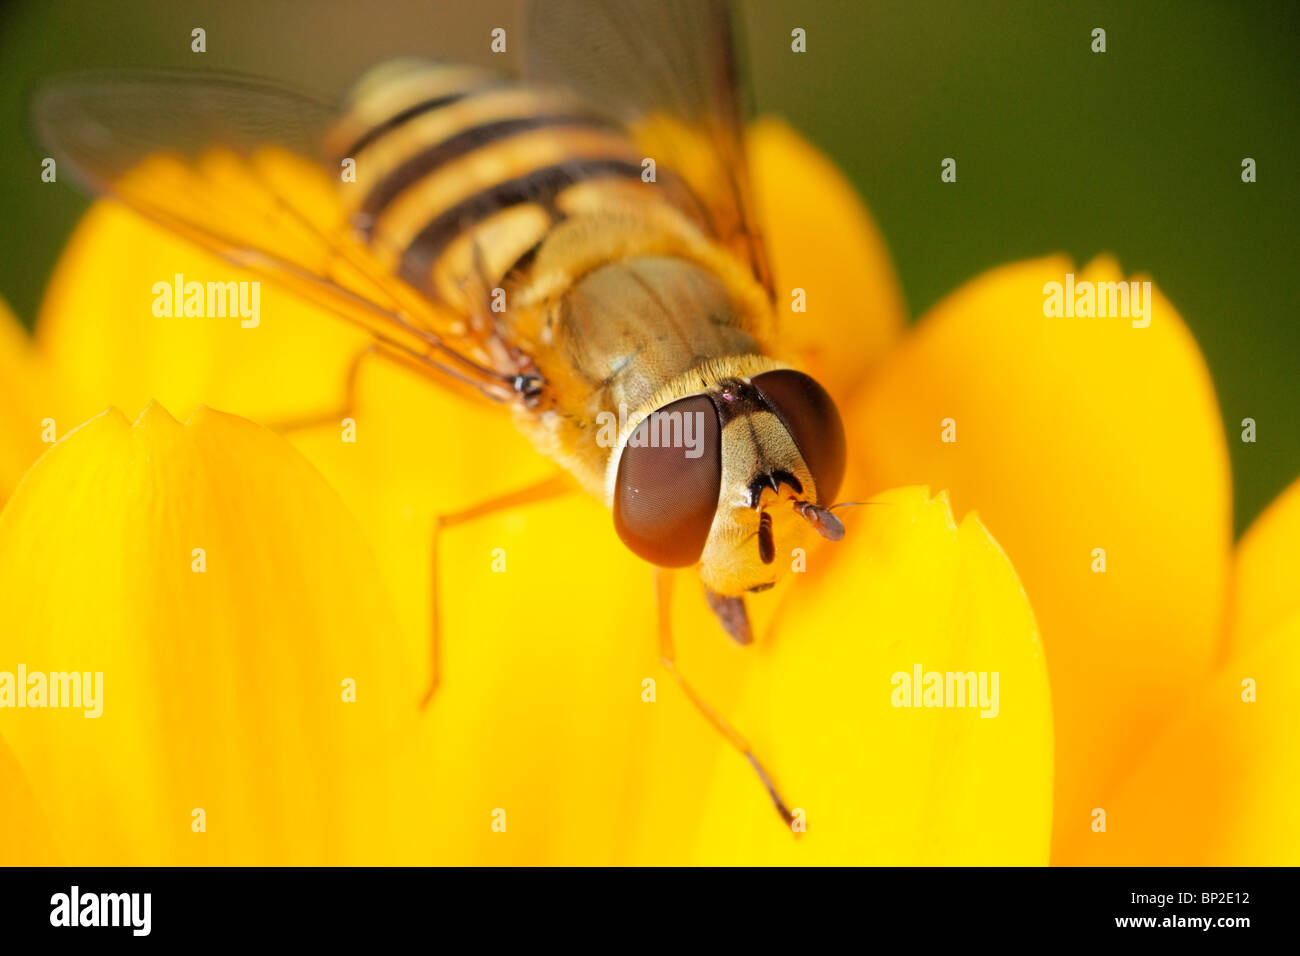 Female Hoverfly standing on a yellow marigold flower. Epistrophe grossulariae Stock Photo